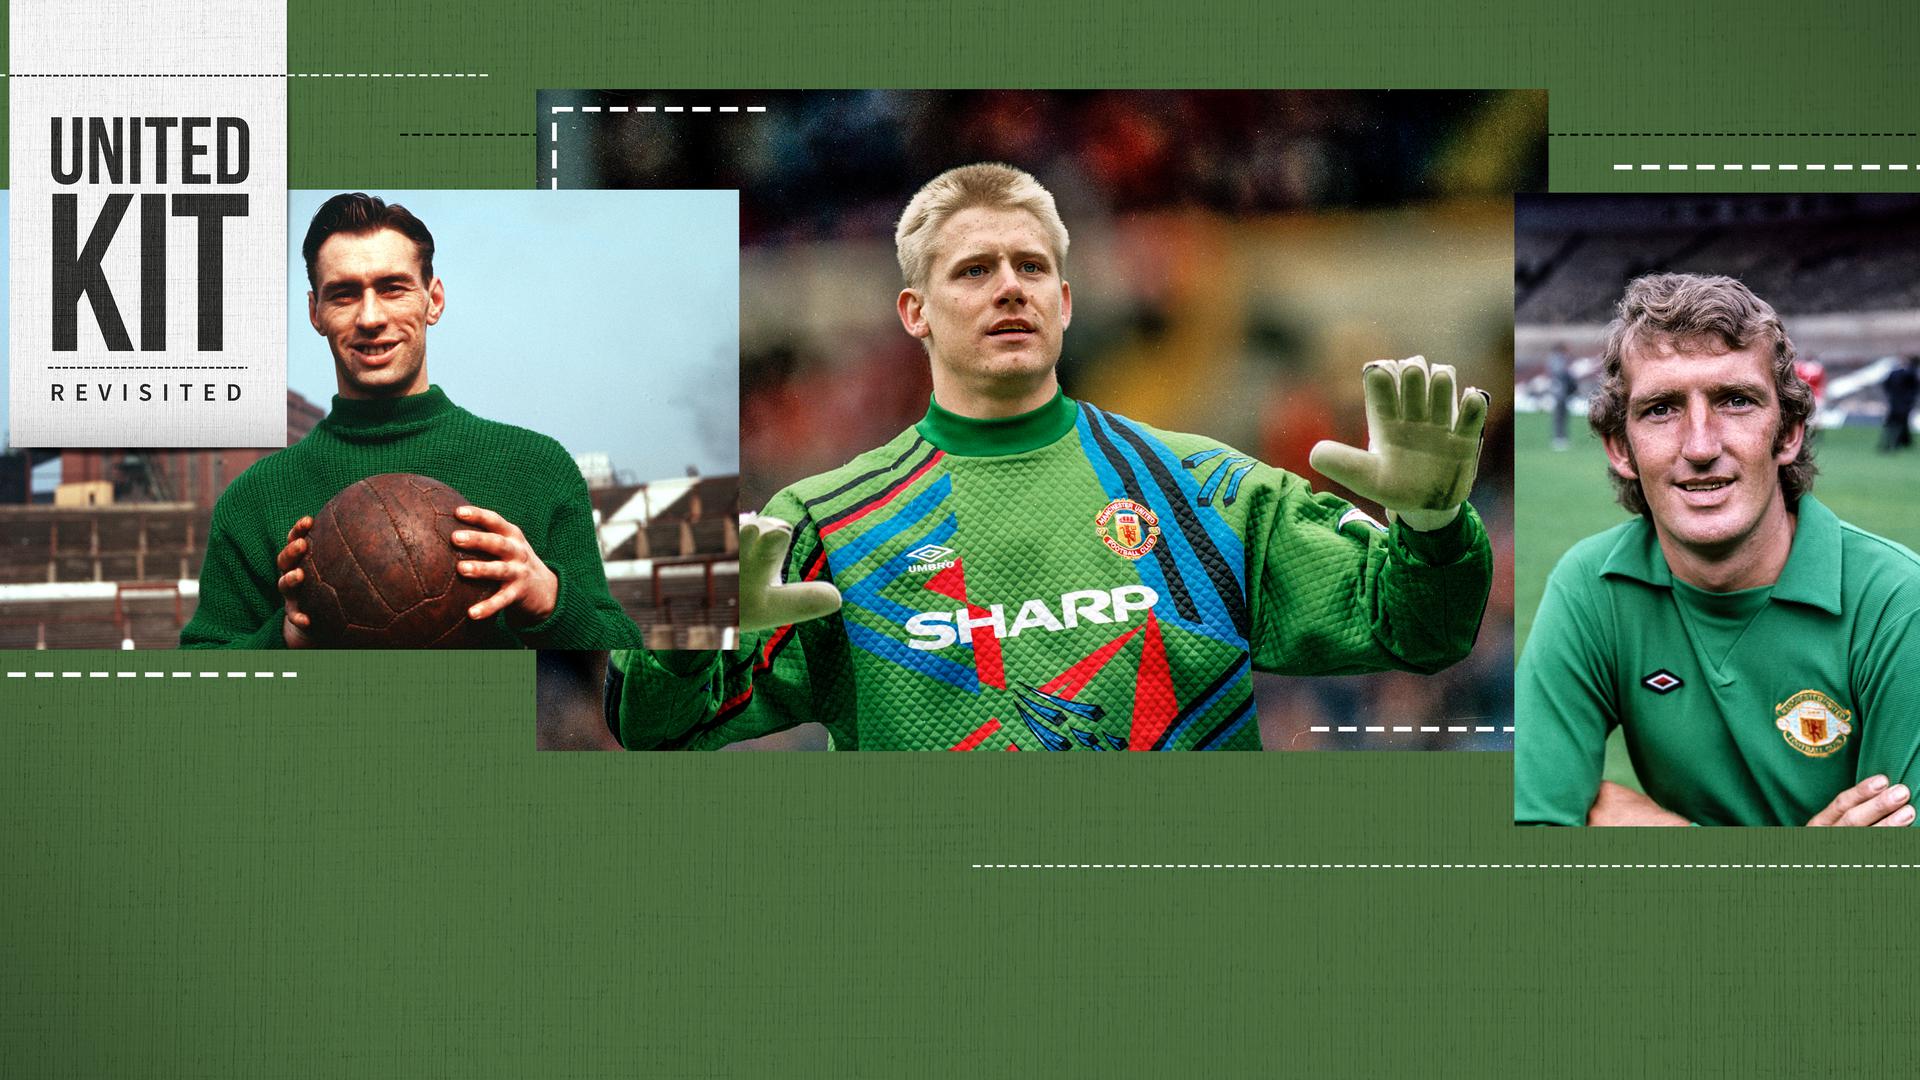 90s goalkeeper kits - top 7 crazy shirts for collectors